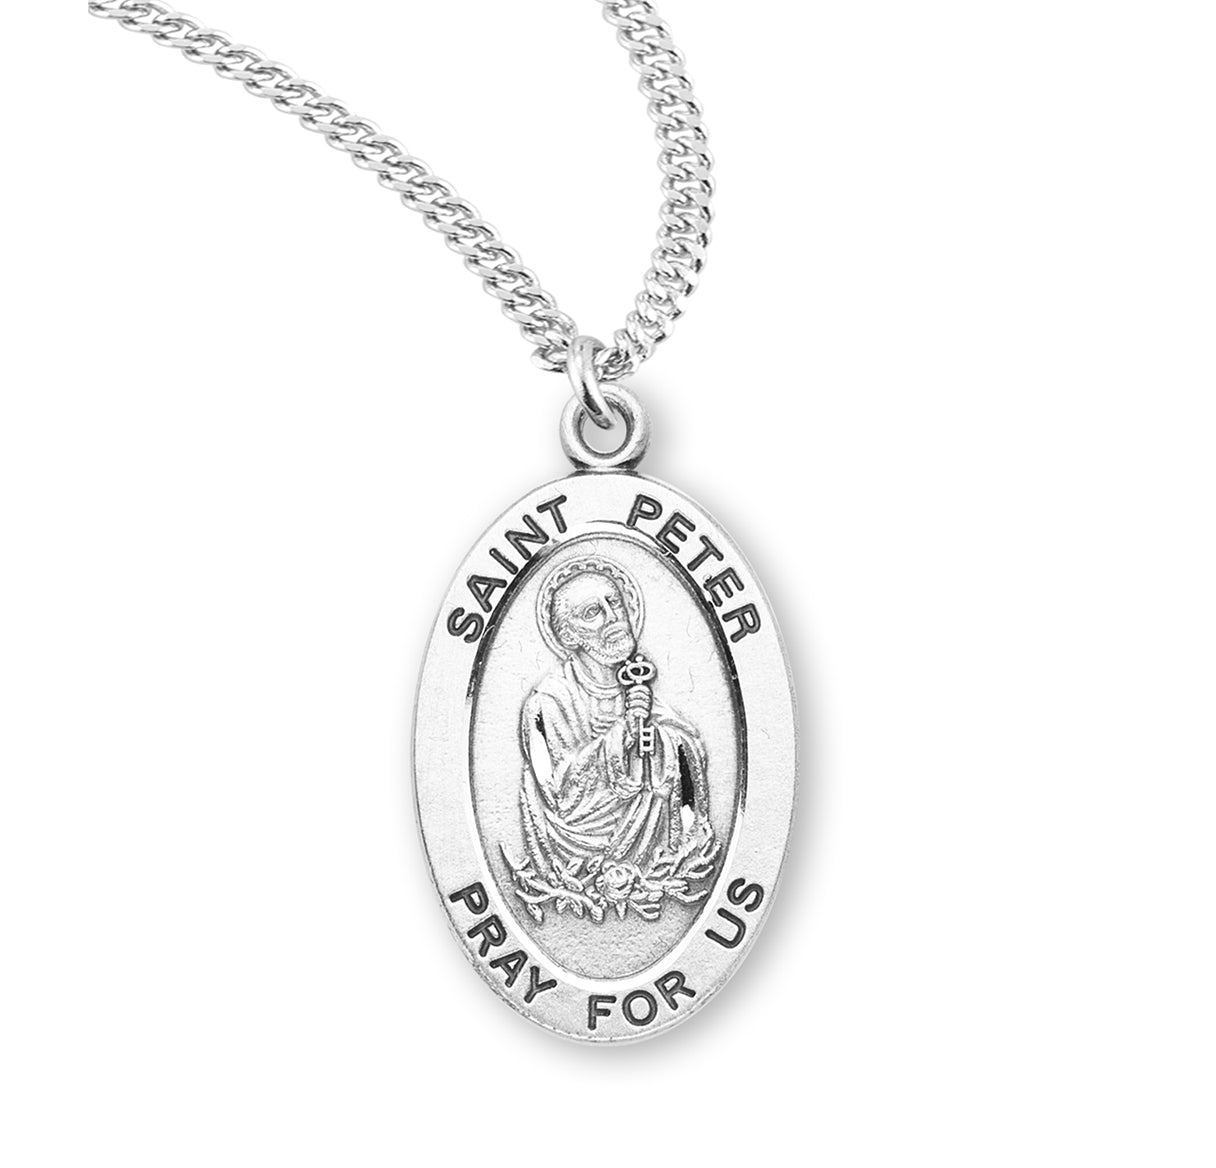 Patron Saint Peter Oval Sterling Silver Medal